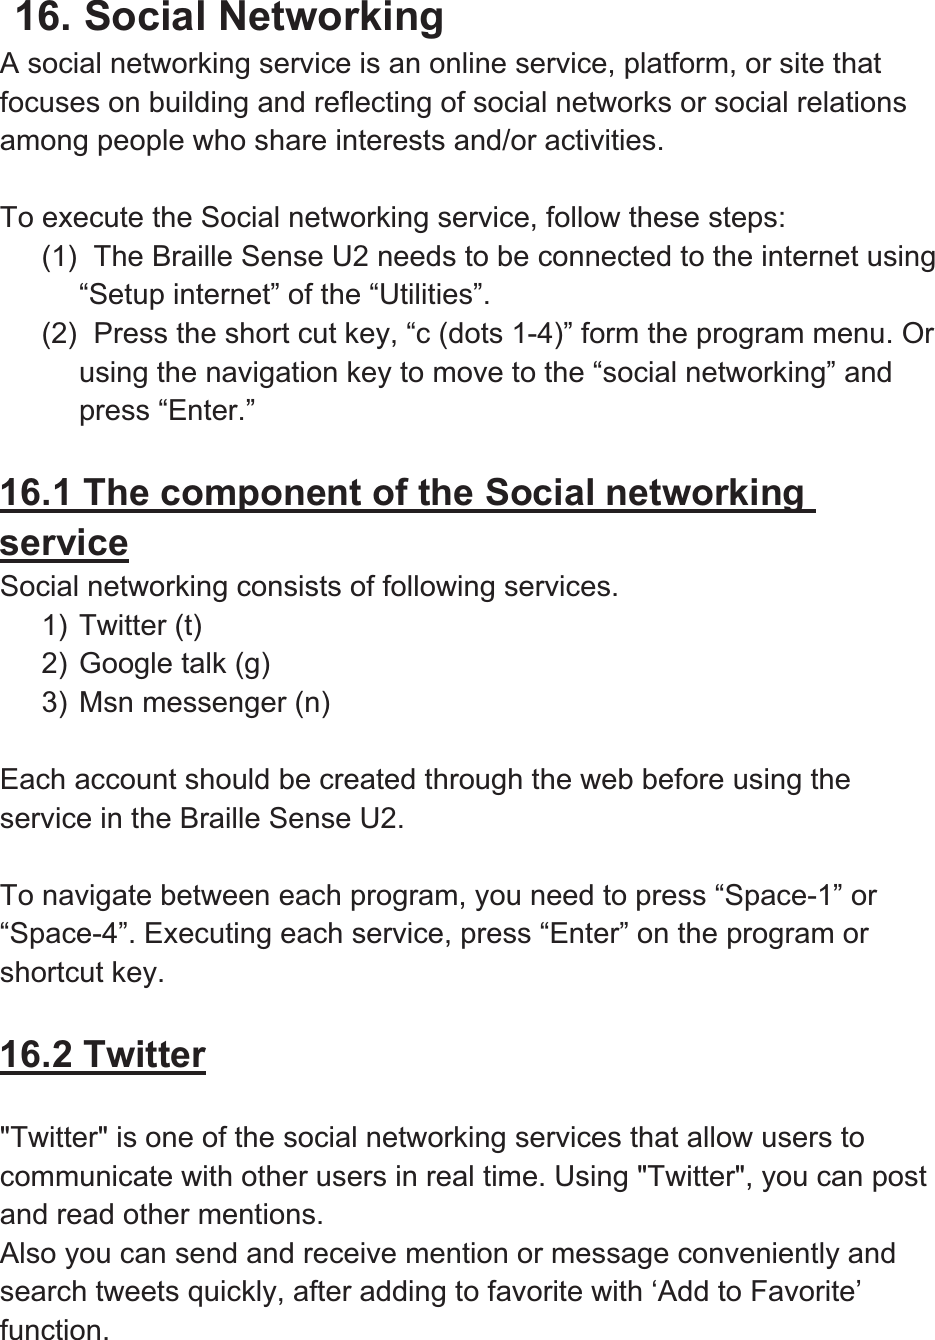 16. Social Networking A social networking service is an online service, platform, or site that focuses on building and reflecting of social networks or social relations among people who share interests and/or activities.   To execute the Social networking service, follow these steps: (1)   The Braille Sense U2 needs to be connected to the internet using “Setup internet” of the “Utilities”.   (2)   Press the short cut key, “c (dots 1-4)” form the program menu. Or using the navigation key to move to the “social networking” and press “Enter.”   16.1 The component of the Social networking serviceSocial networking consists of following services. 1) Twitter (t) 2) Google talk (g) 3) Msn messenger (n) Each account should be created through the web before using the service in the Braille Sense U2.   To navigate between each program, you need to press “Space-1” or “Space-4”. Executing each service, press “Enter” on the program or shortcut key.   16.2 Twitter&quot;Twitter&quot; is one of the social networking services that allow users to communicate with other users in real time. Using &quot;Twitter&quot;, you can post and read other mentions.   Also you can send and receive mention or message conveniently and search tweets quickly, after adding to favorite with ‘Add to Favorite’ function.  